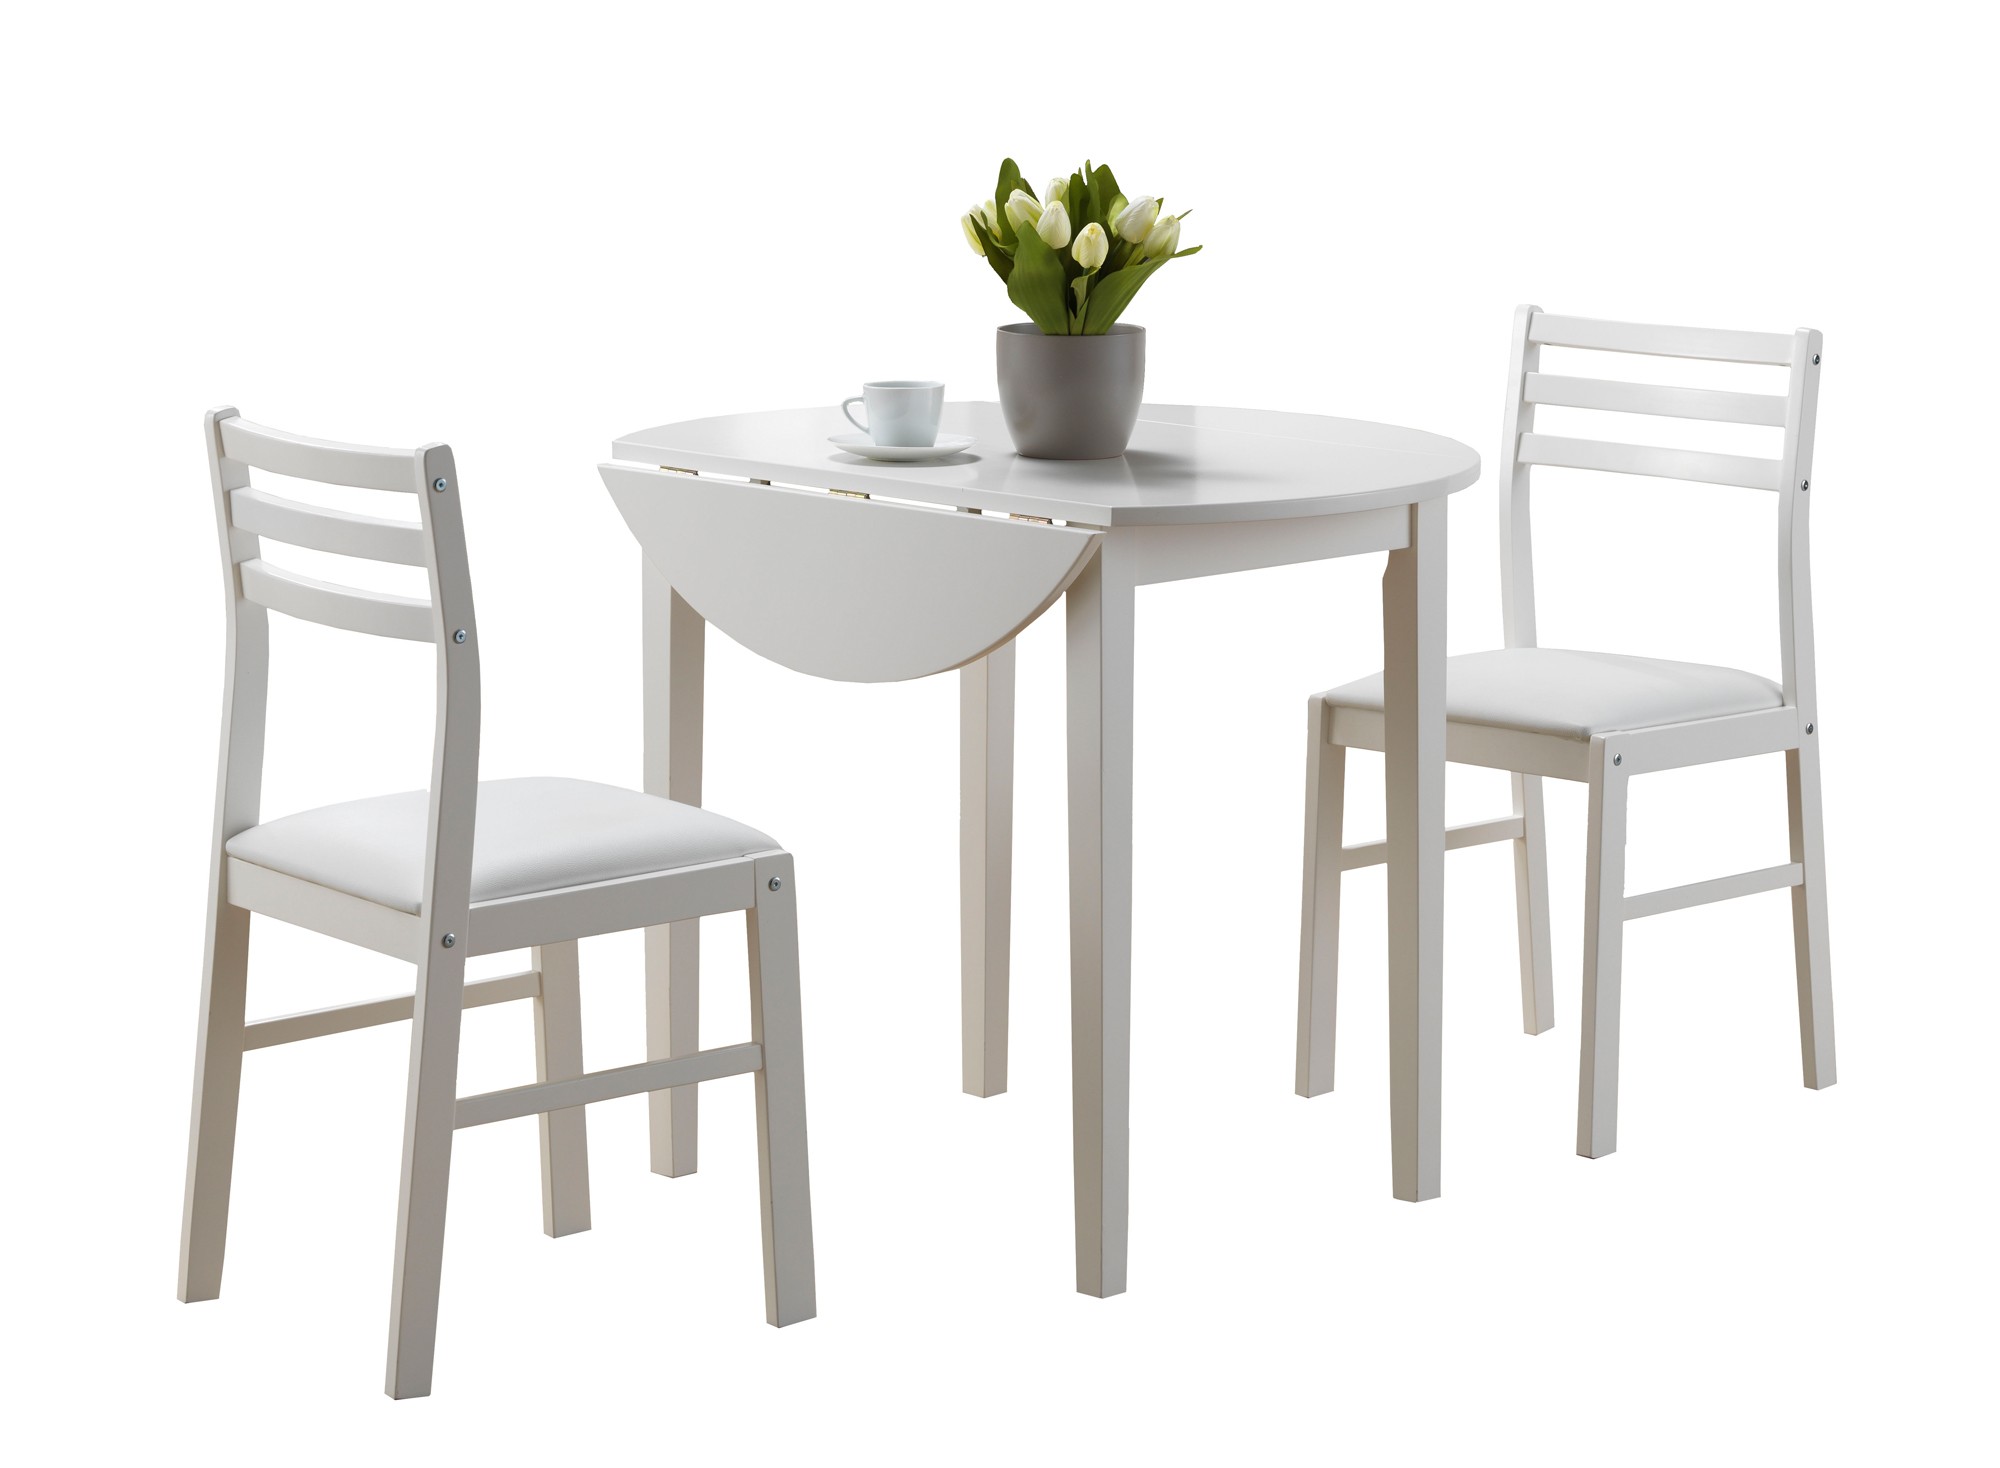 68" x 66.5" x 95" White Foam Solid Wood Leather Look 3pcs Dining Set